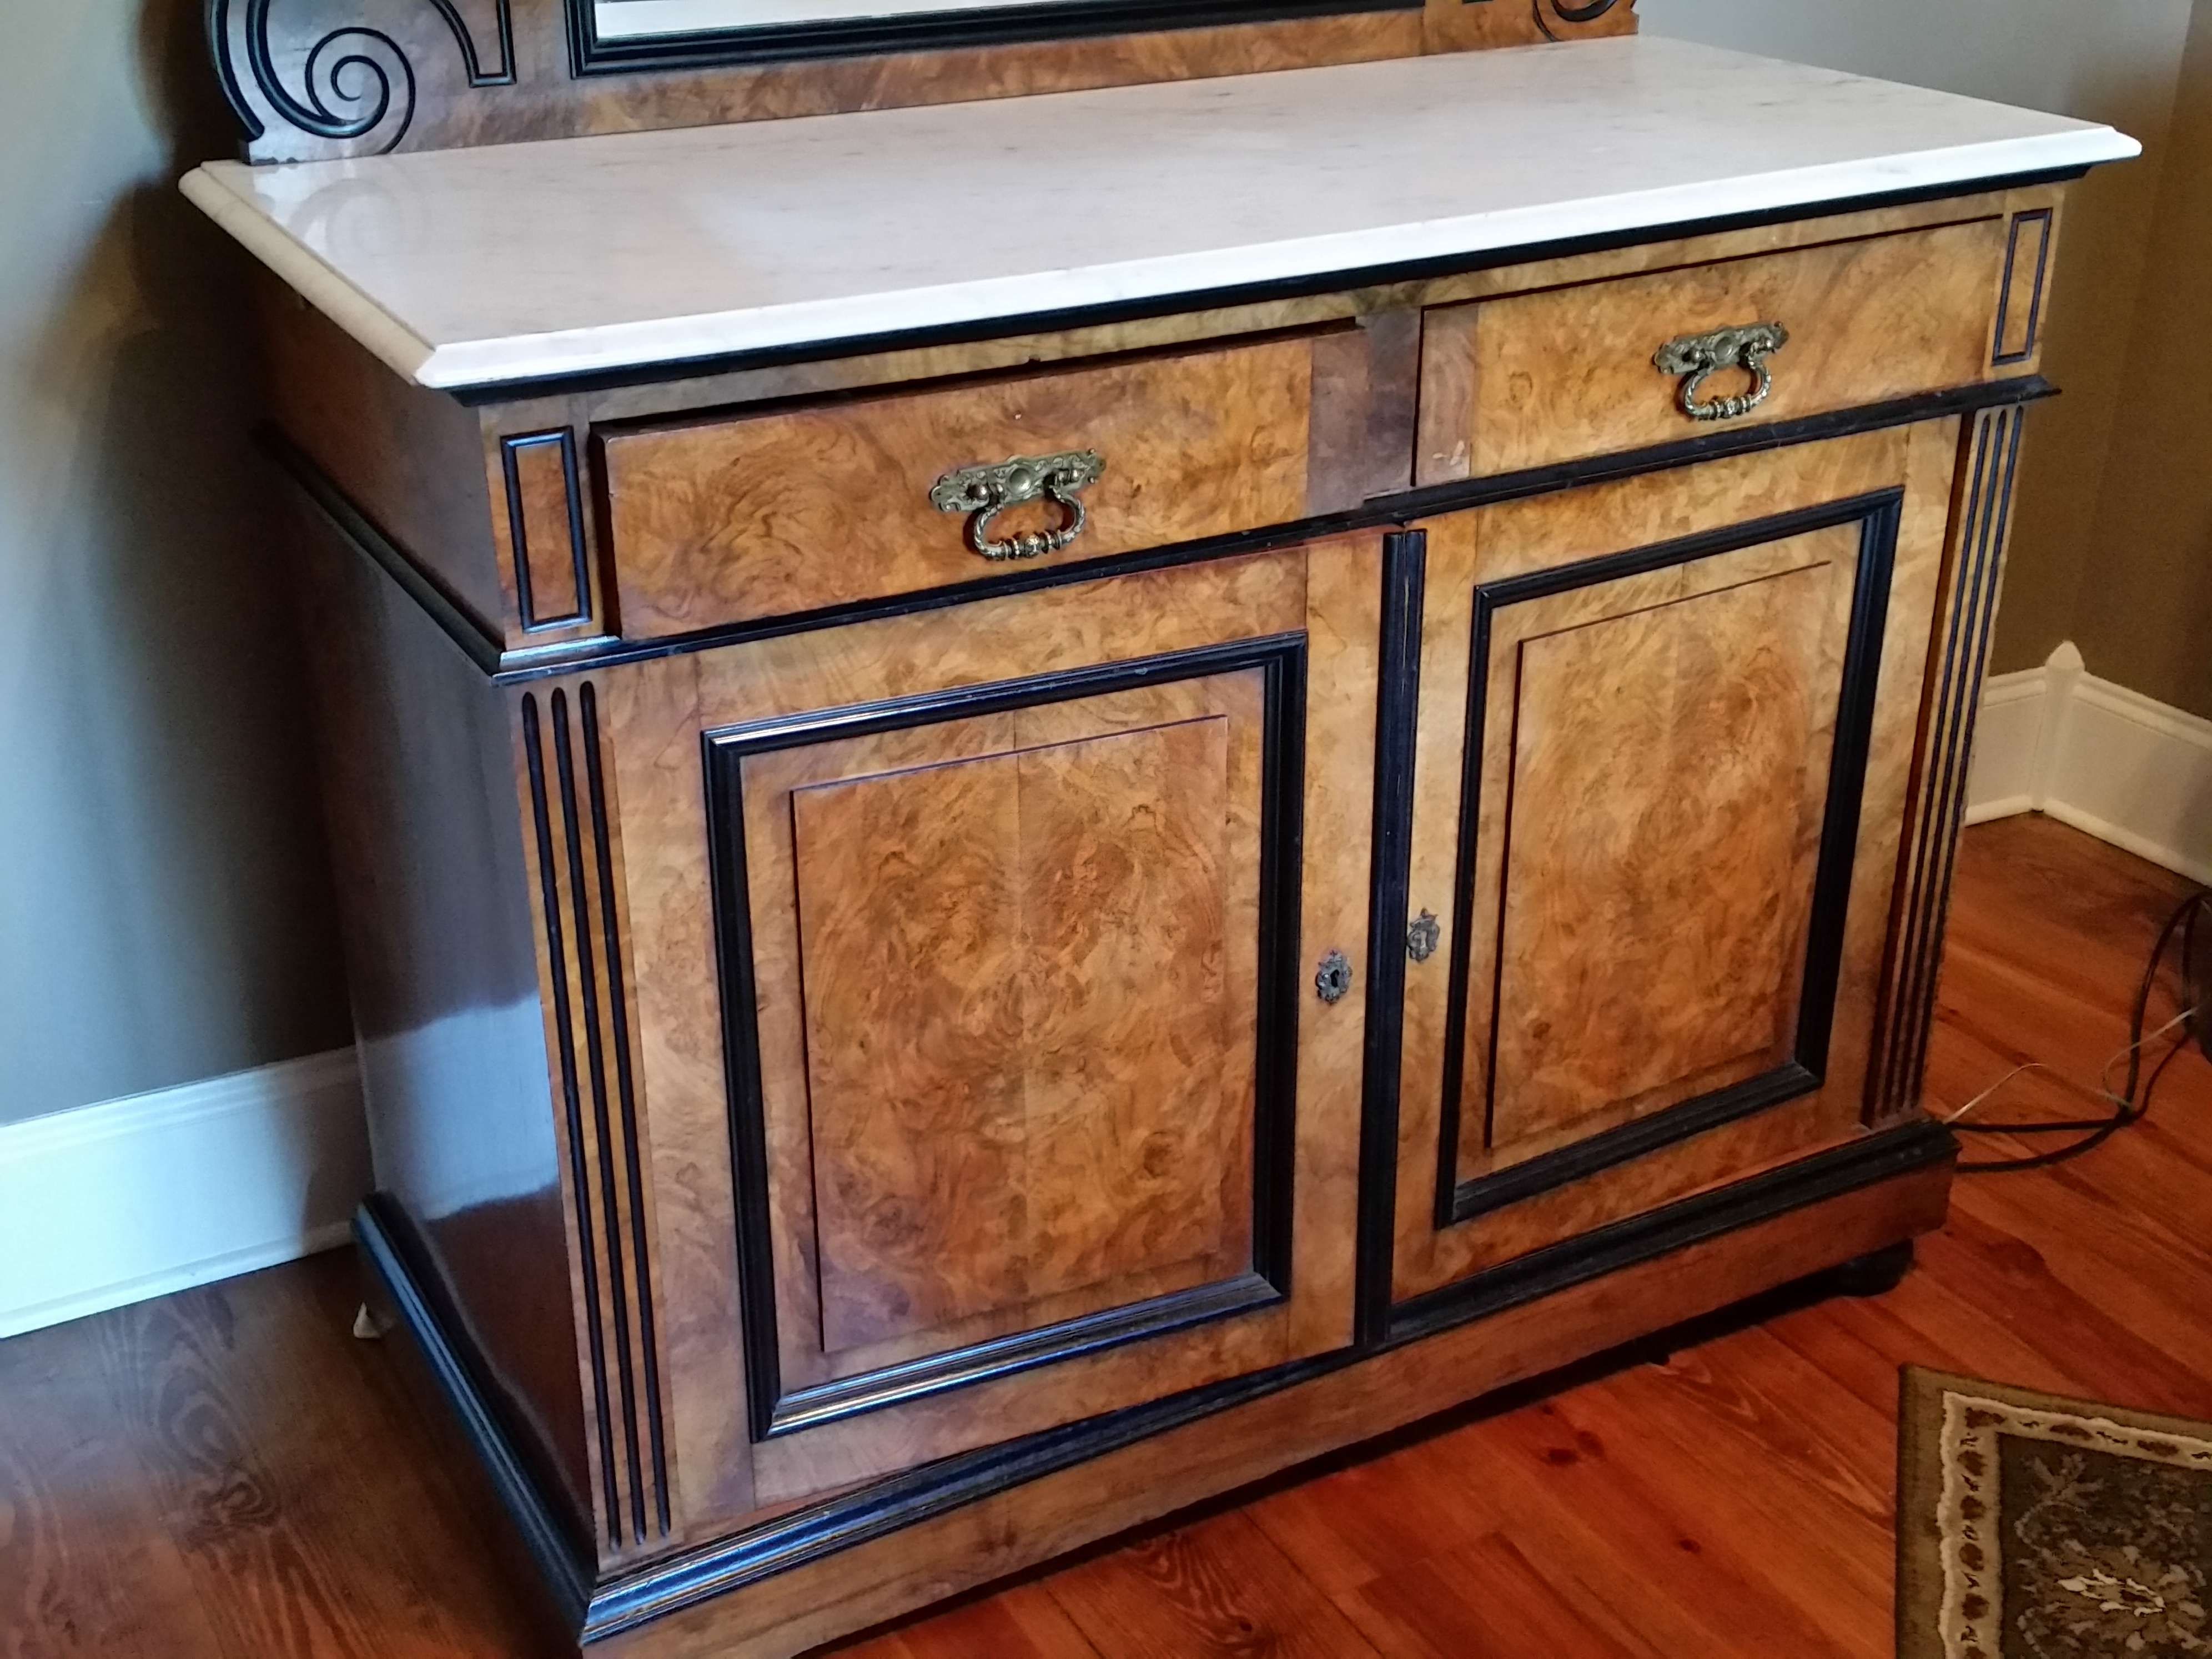 19th Century Buffet Sideboard For Sale | Antiques | Classifieds Regarding Antique Marble Top Sideboards (View 10 of 20)